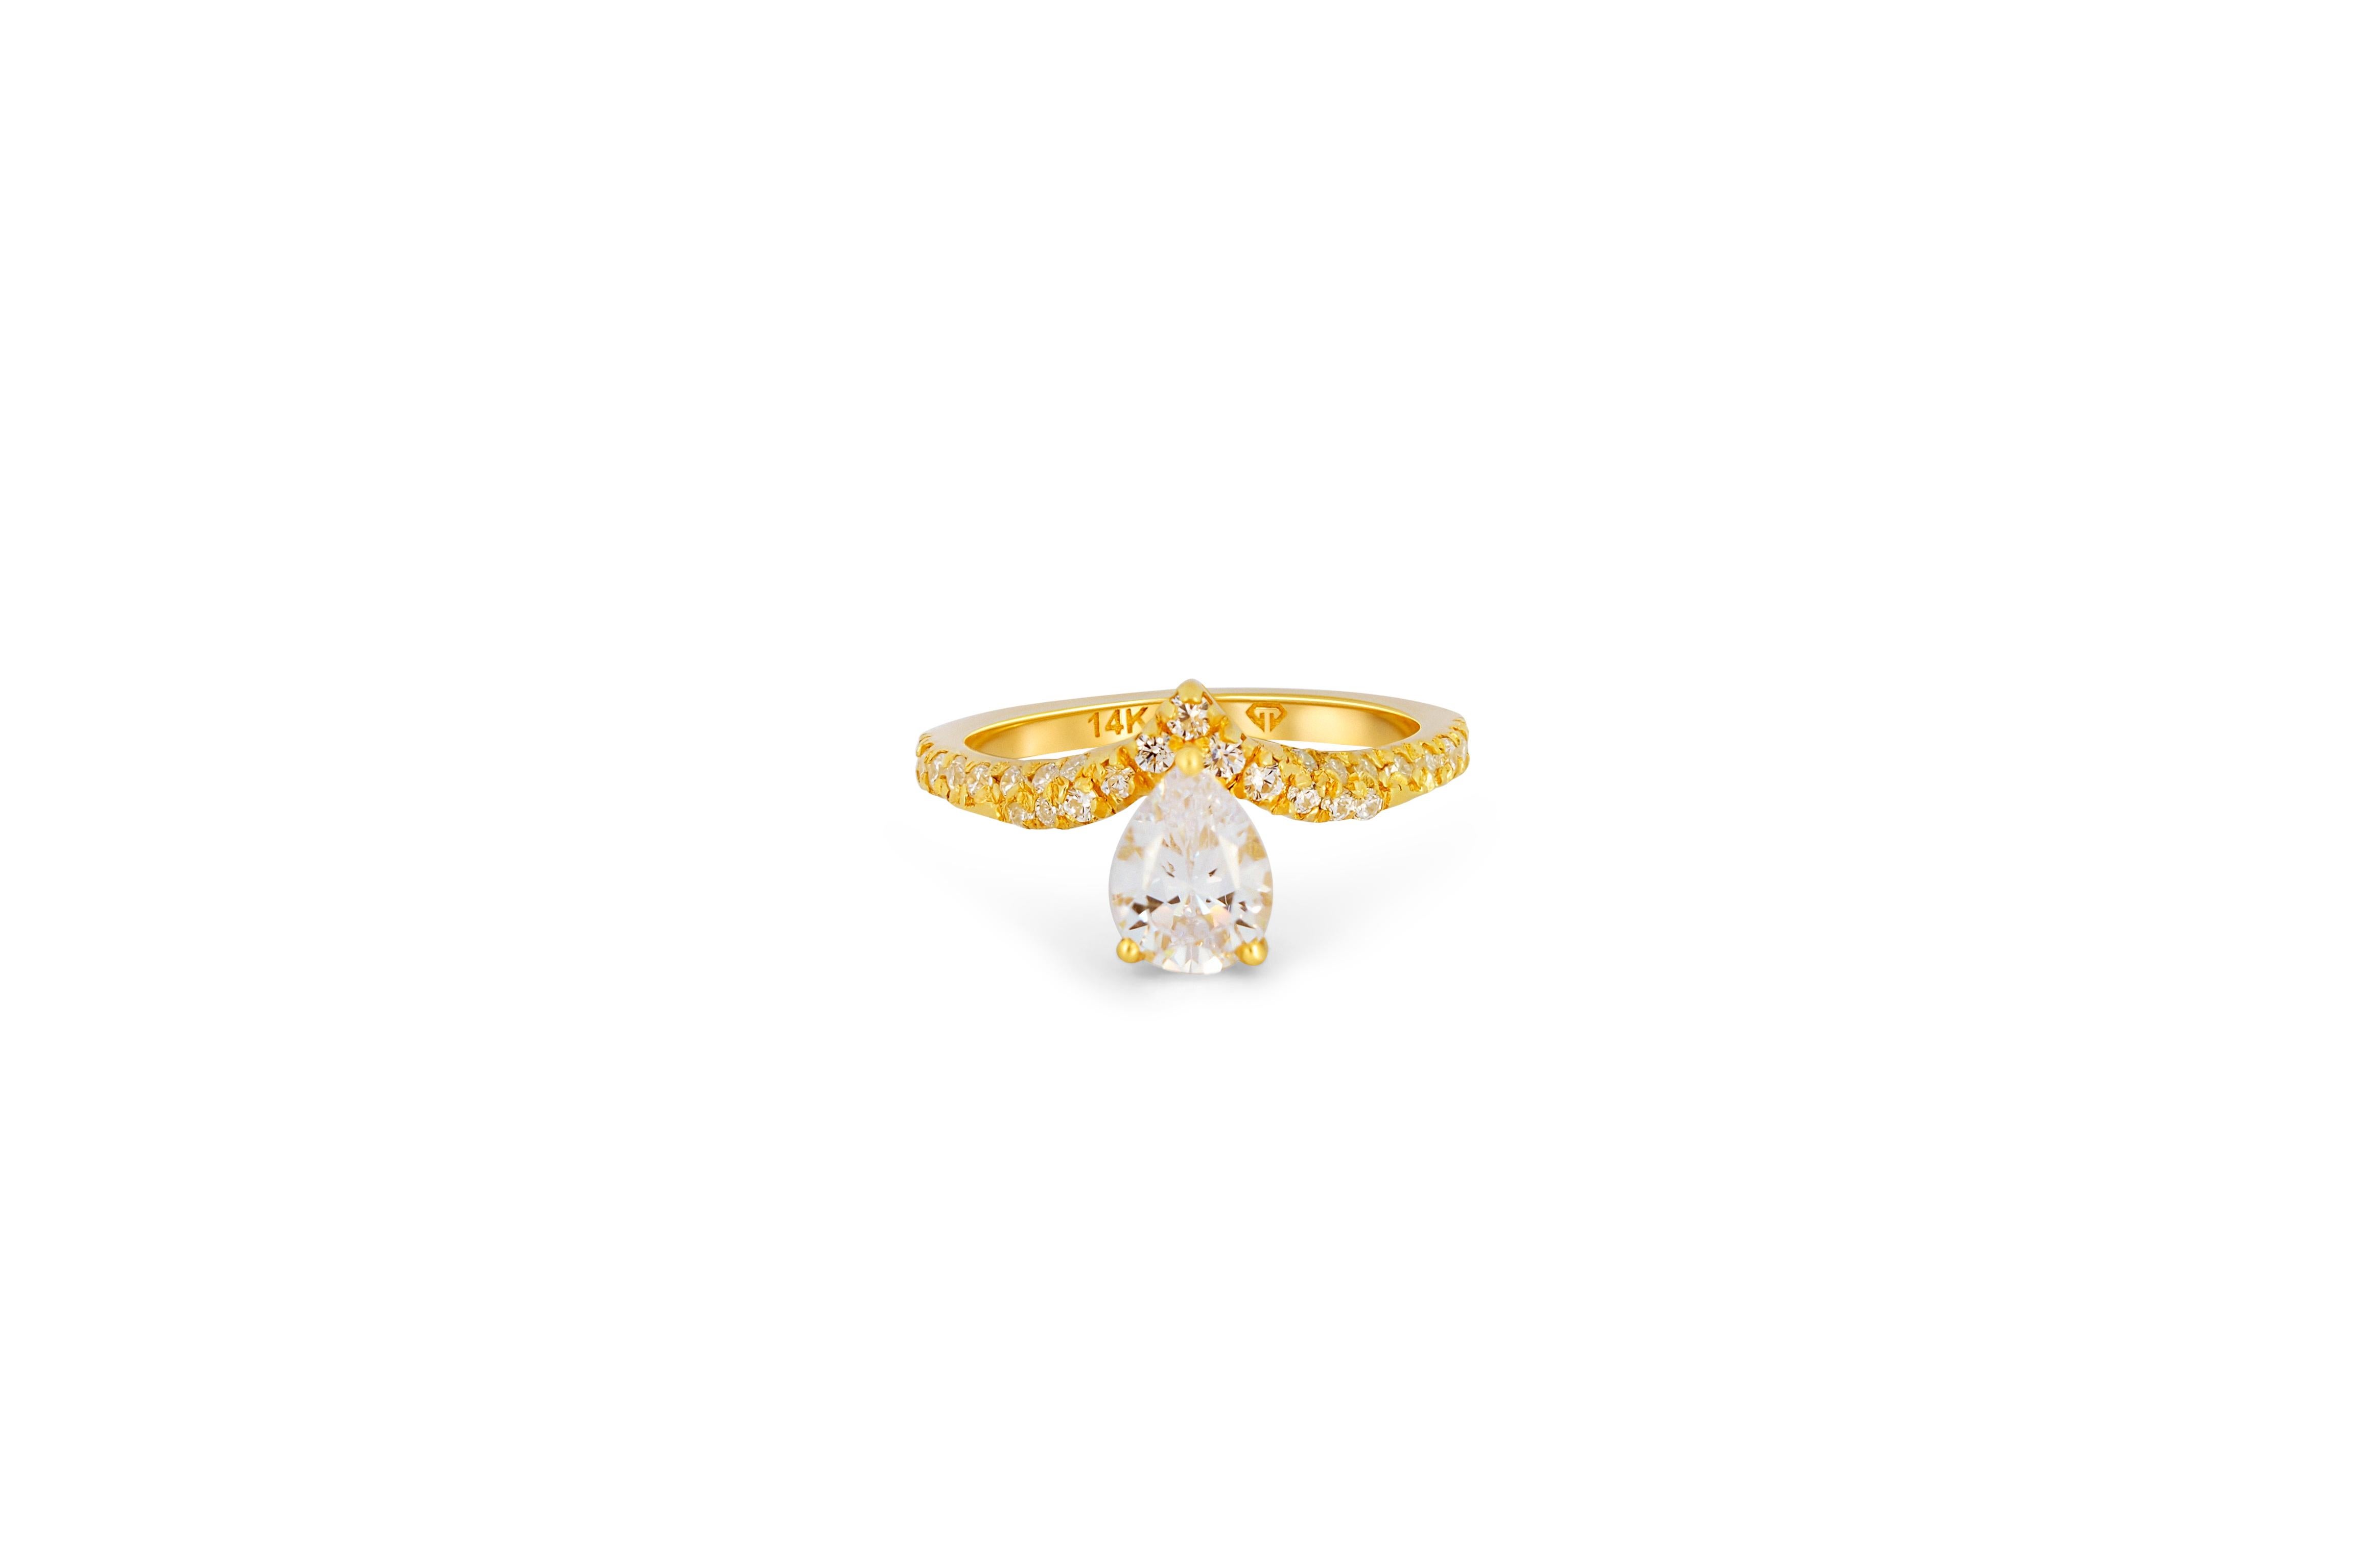 1 ct Pear moissanite 14k gold ring. Moissanite solitaire ring. Curved Band Solitaire Pear Engagement Ring. Diamond cut moissanite ring. Pear Moissanite engagement ring.  

Metal: 14k gold
Weight: 2.2 gr depends from size
Moissanite: weight 1 ct, D/